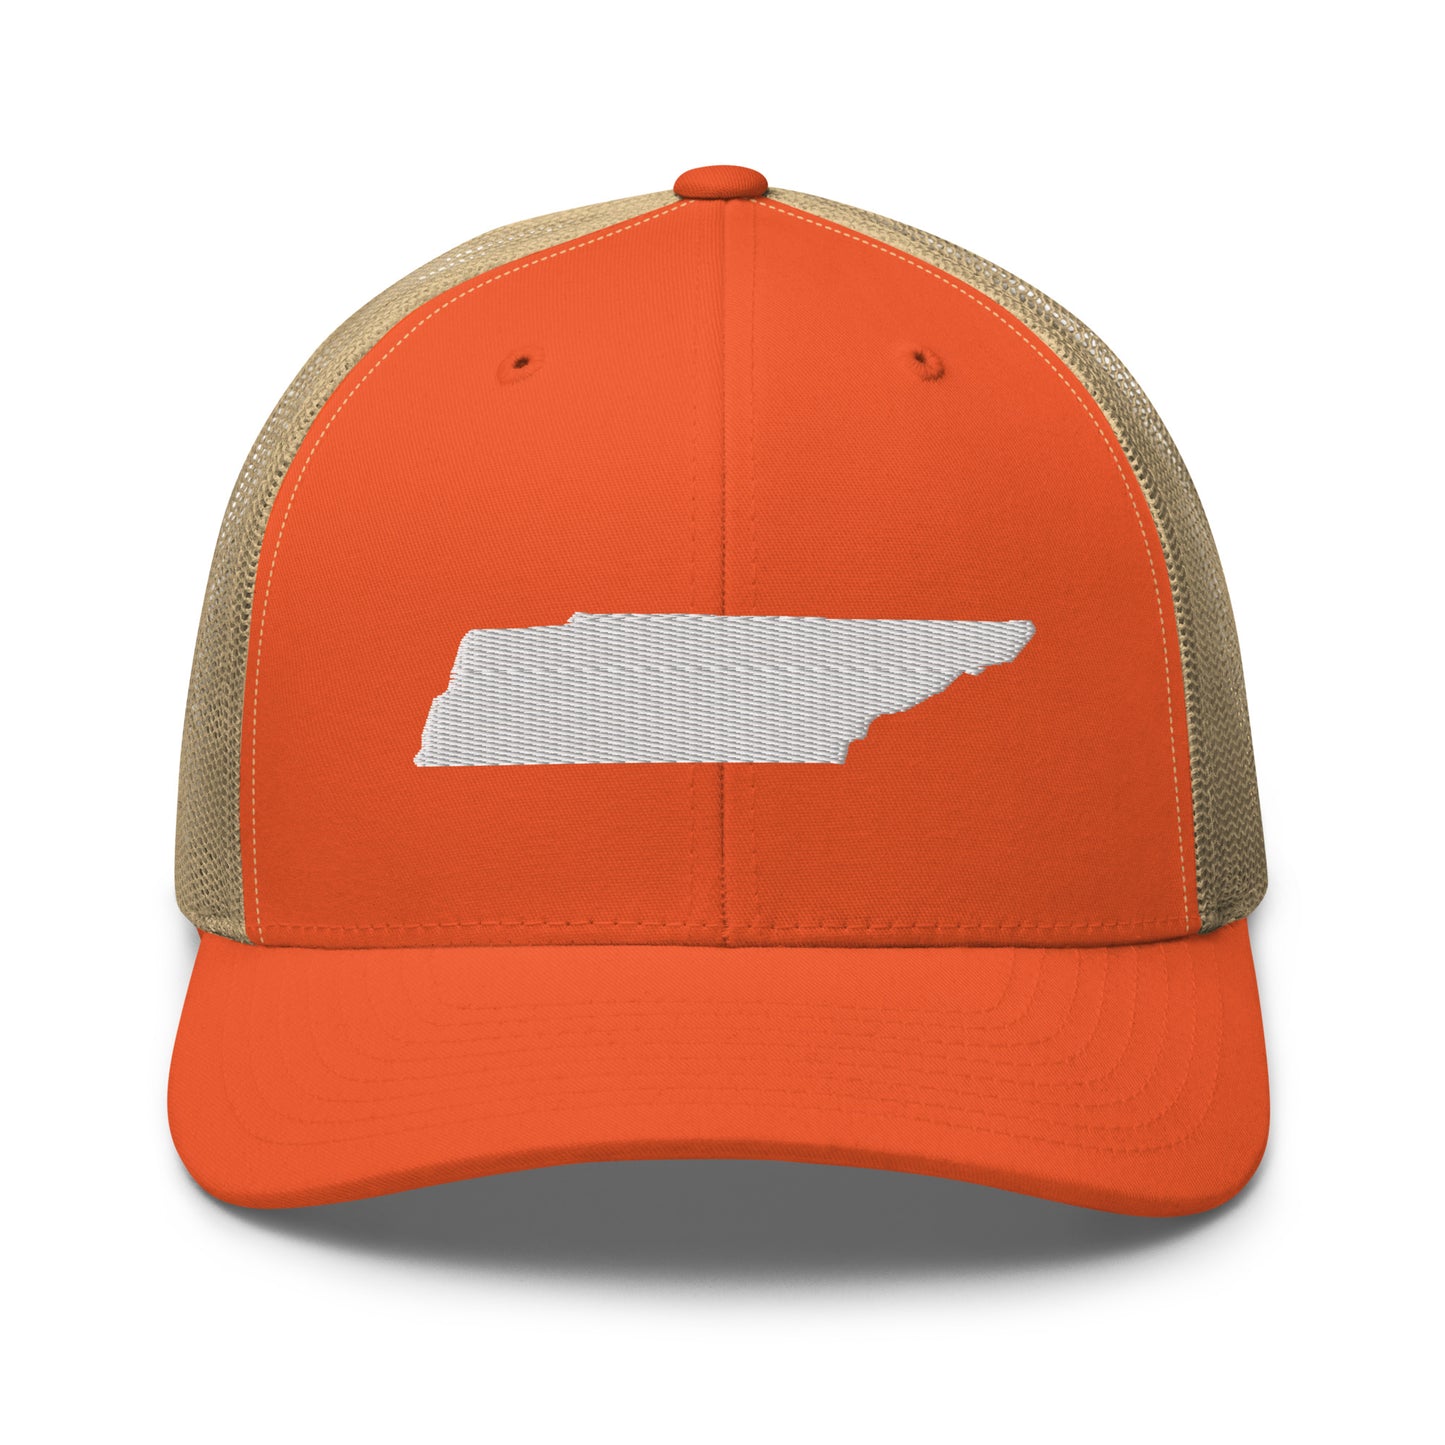 Tennessee State Silhouette Mid 6 Panel Snapback Trucker Hat